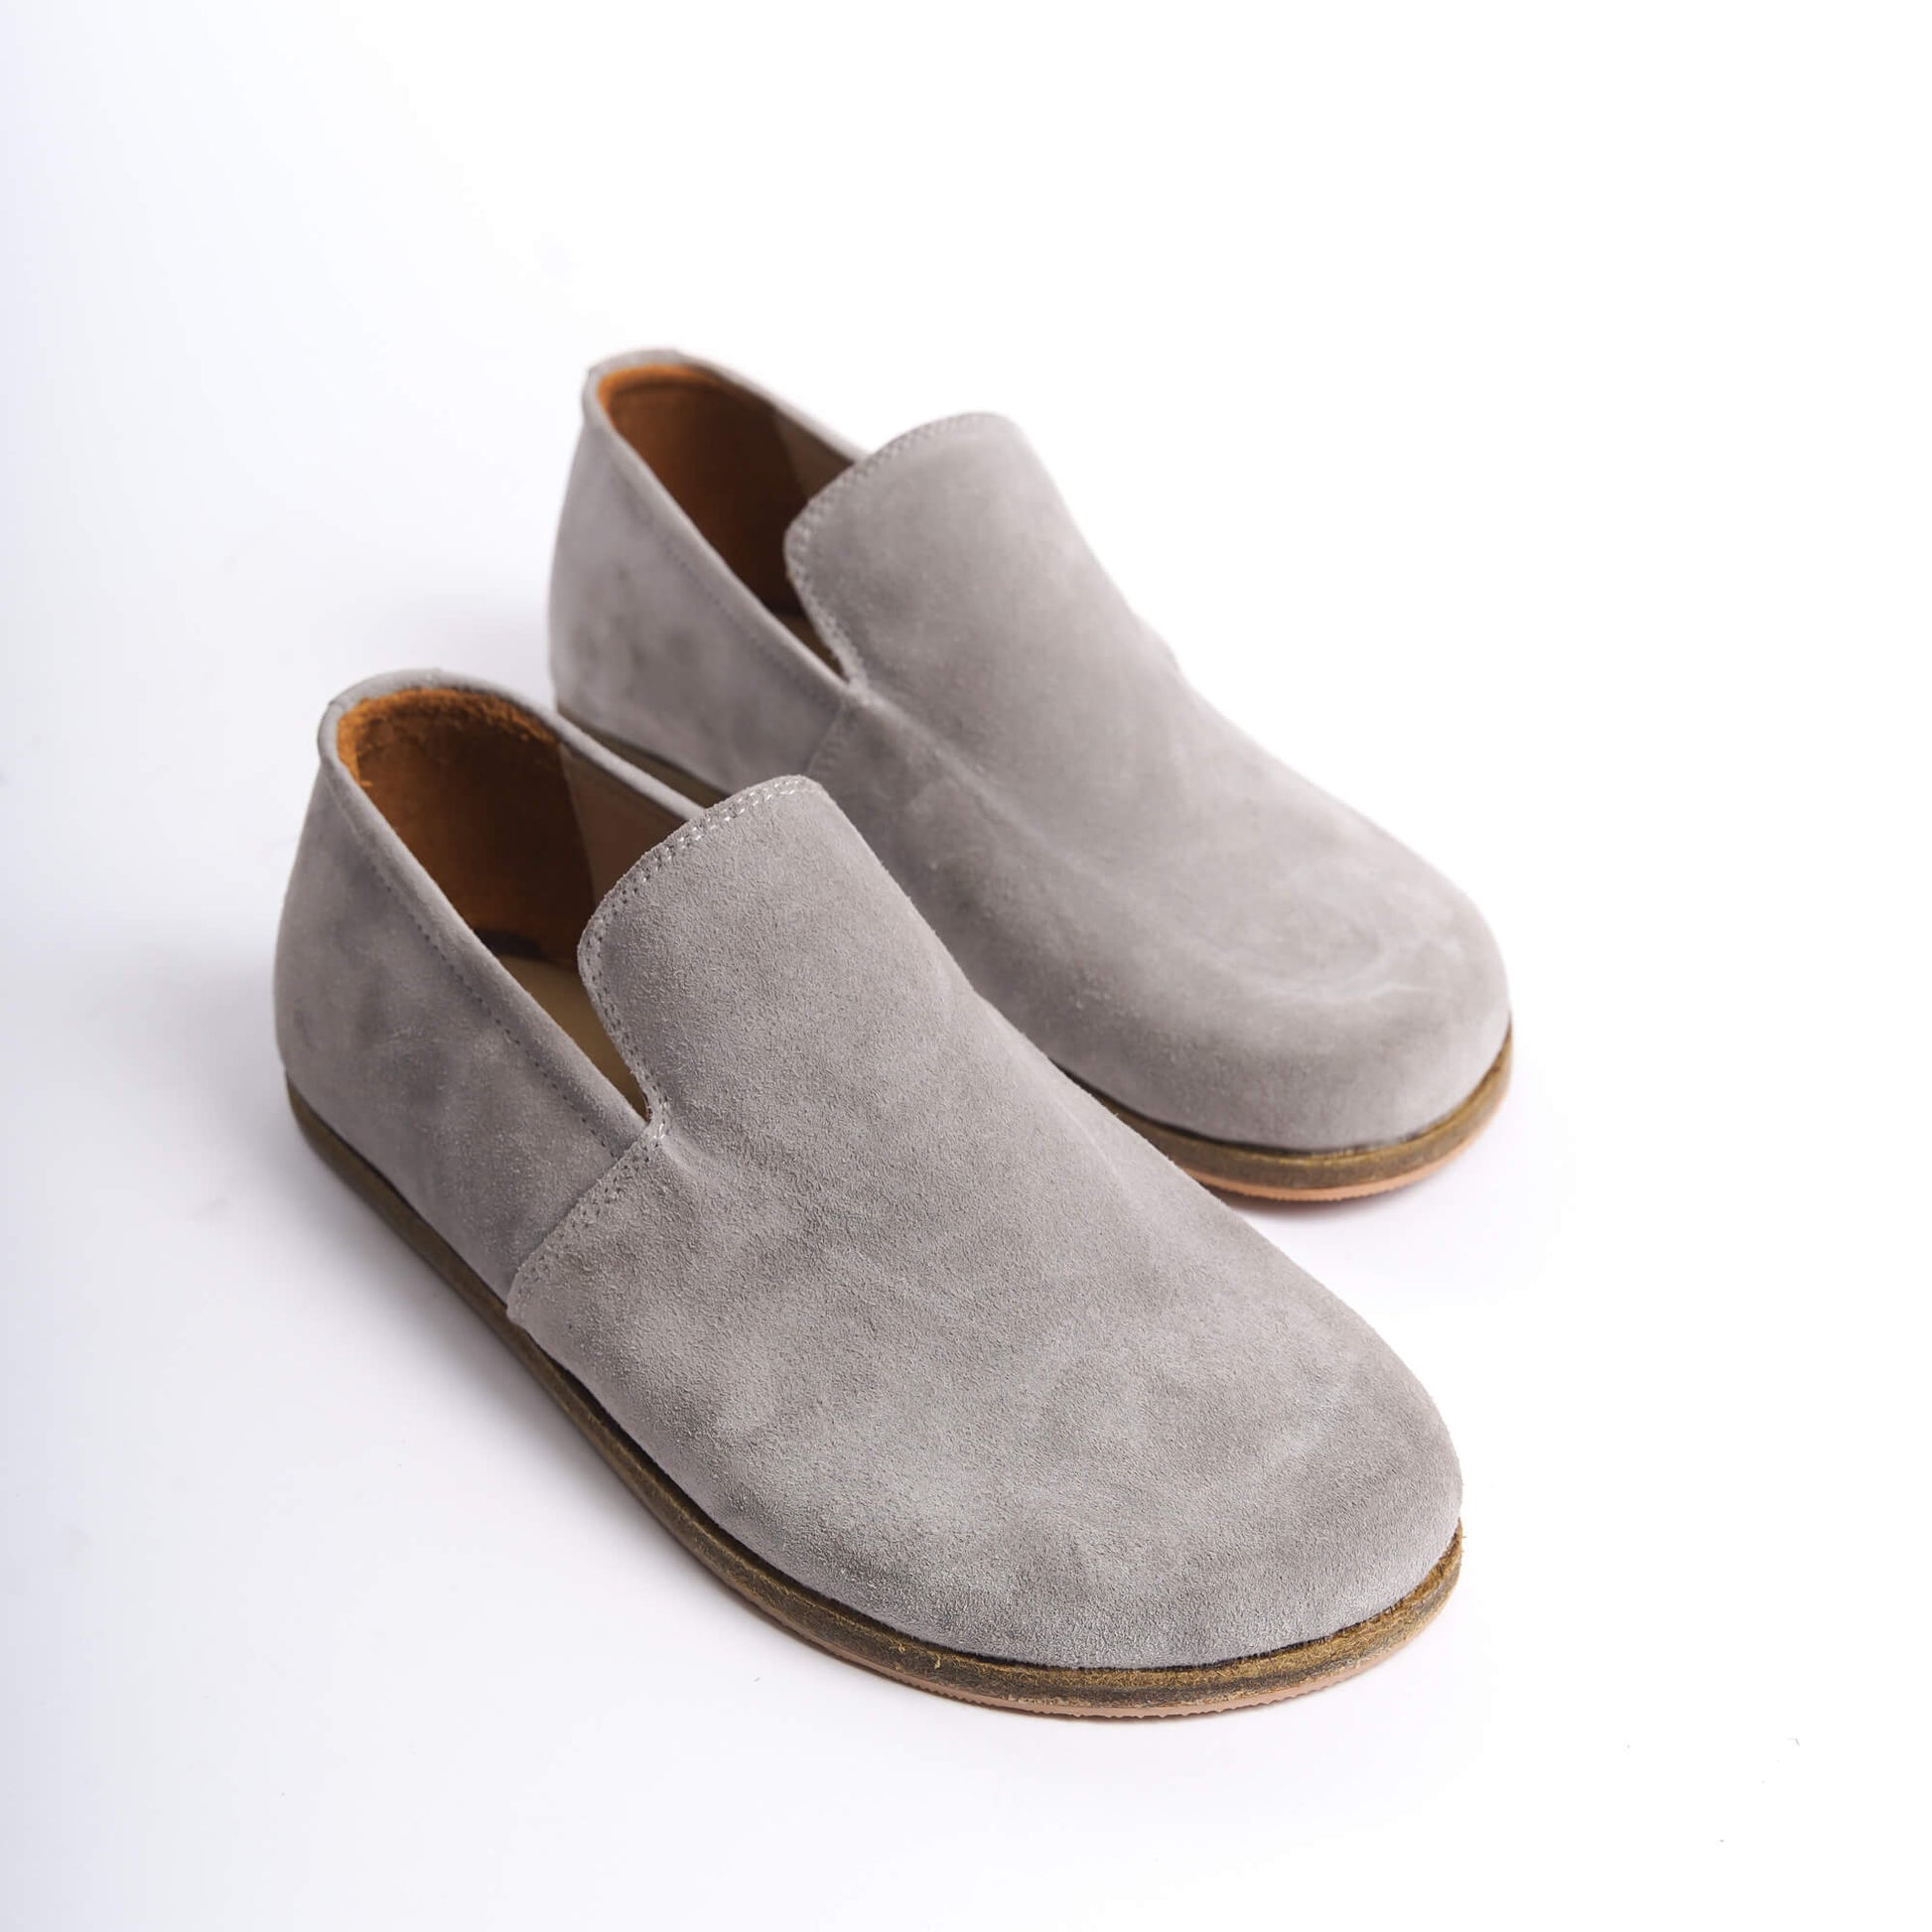 Aeolia gray suede barefoot women loafers, featuring a minimalist and comfortable design.